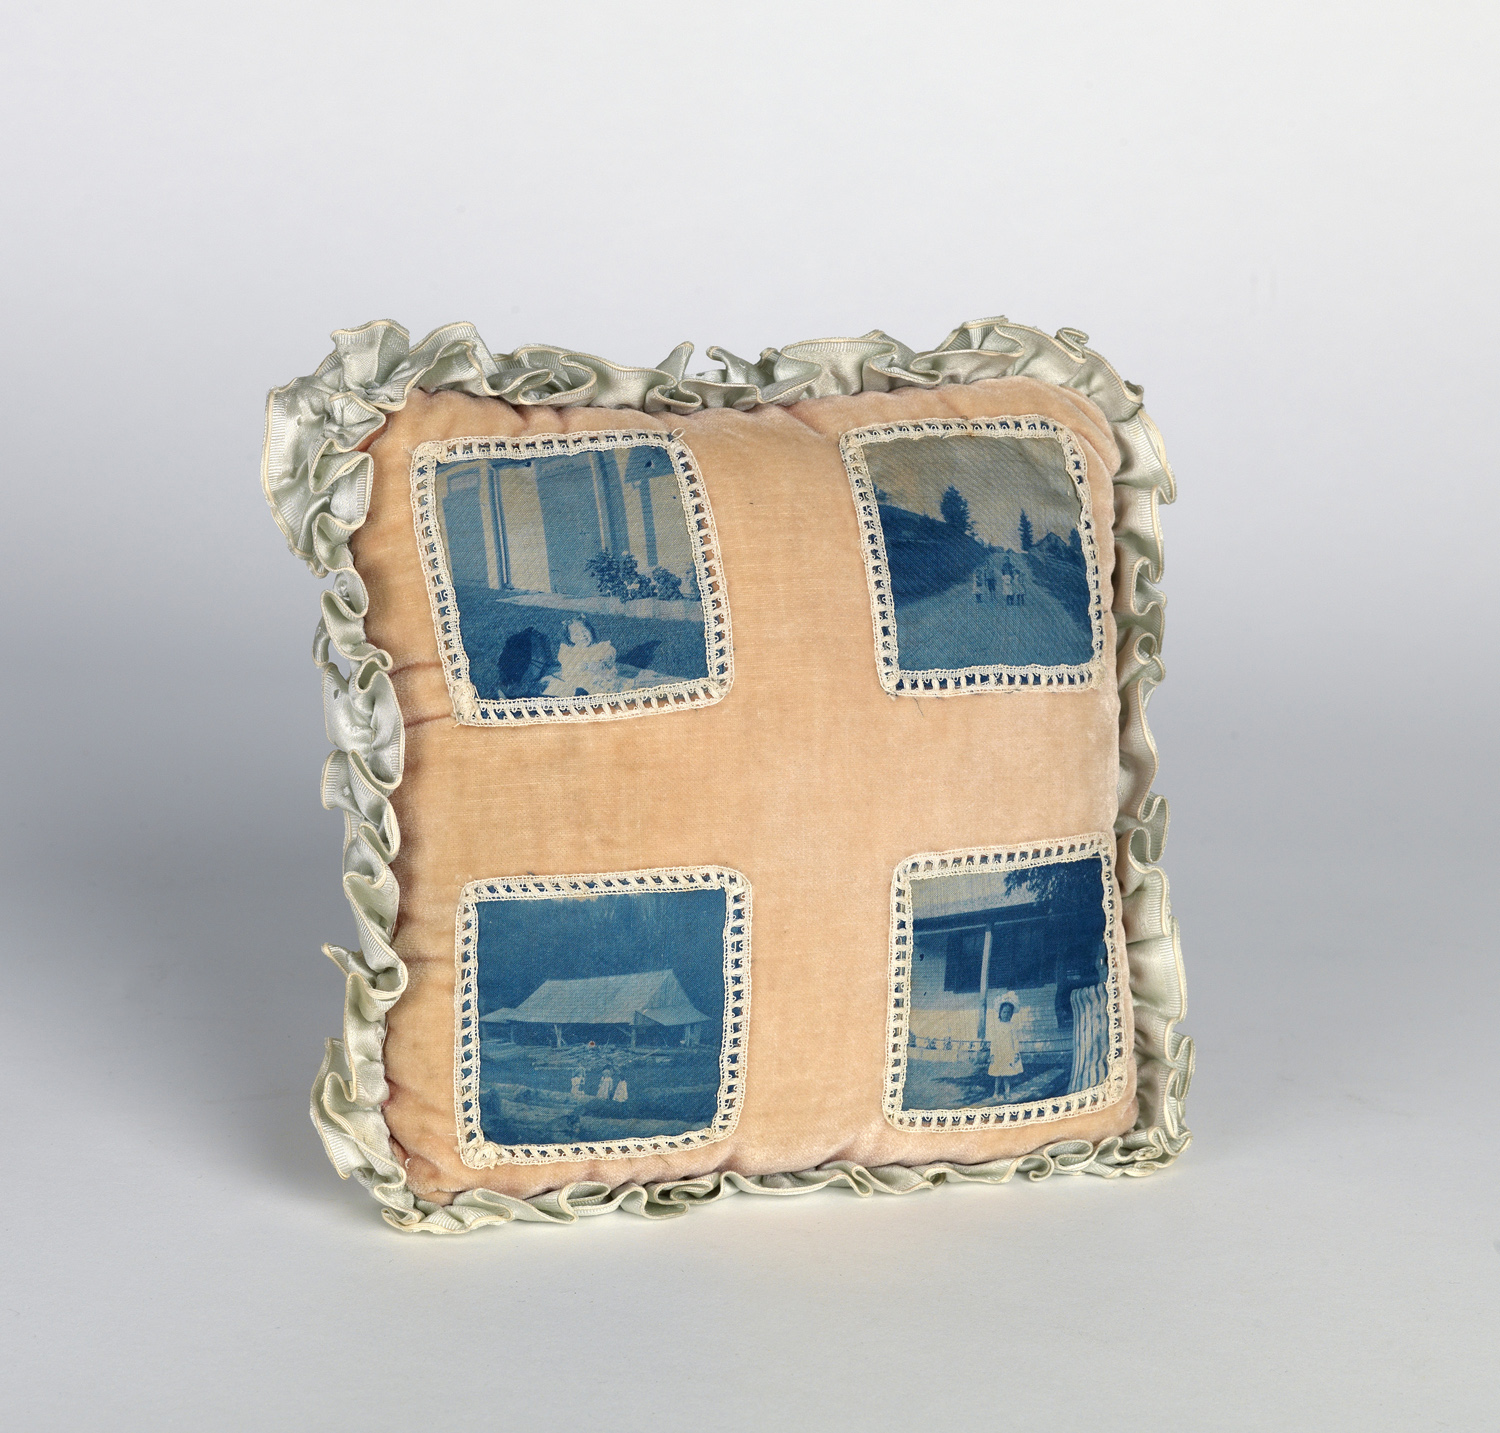    Child's pillow case highlighted with cyanotypes. Circa 1895   